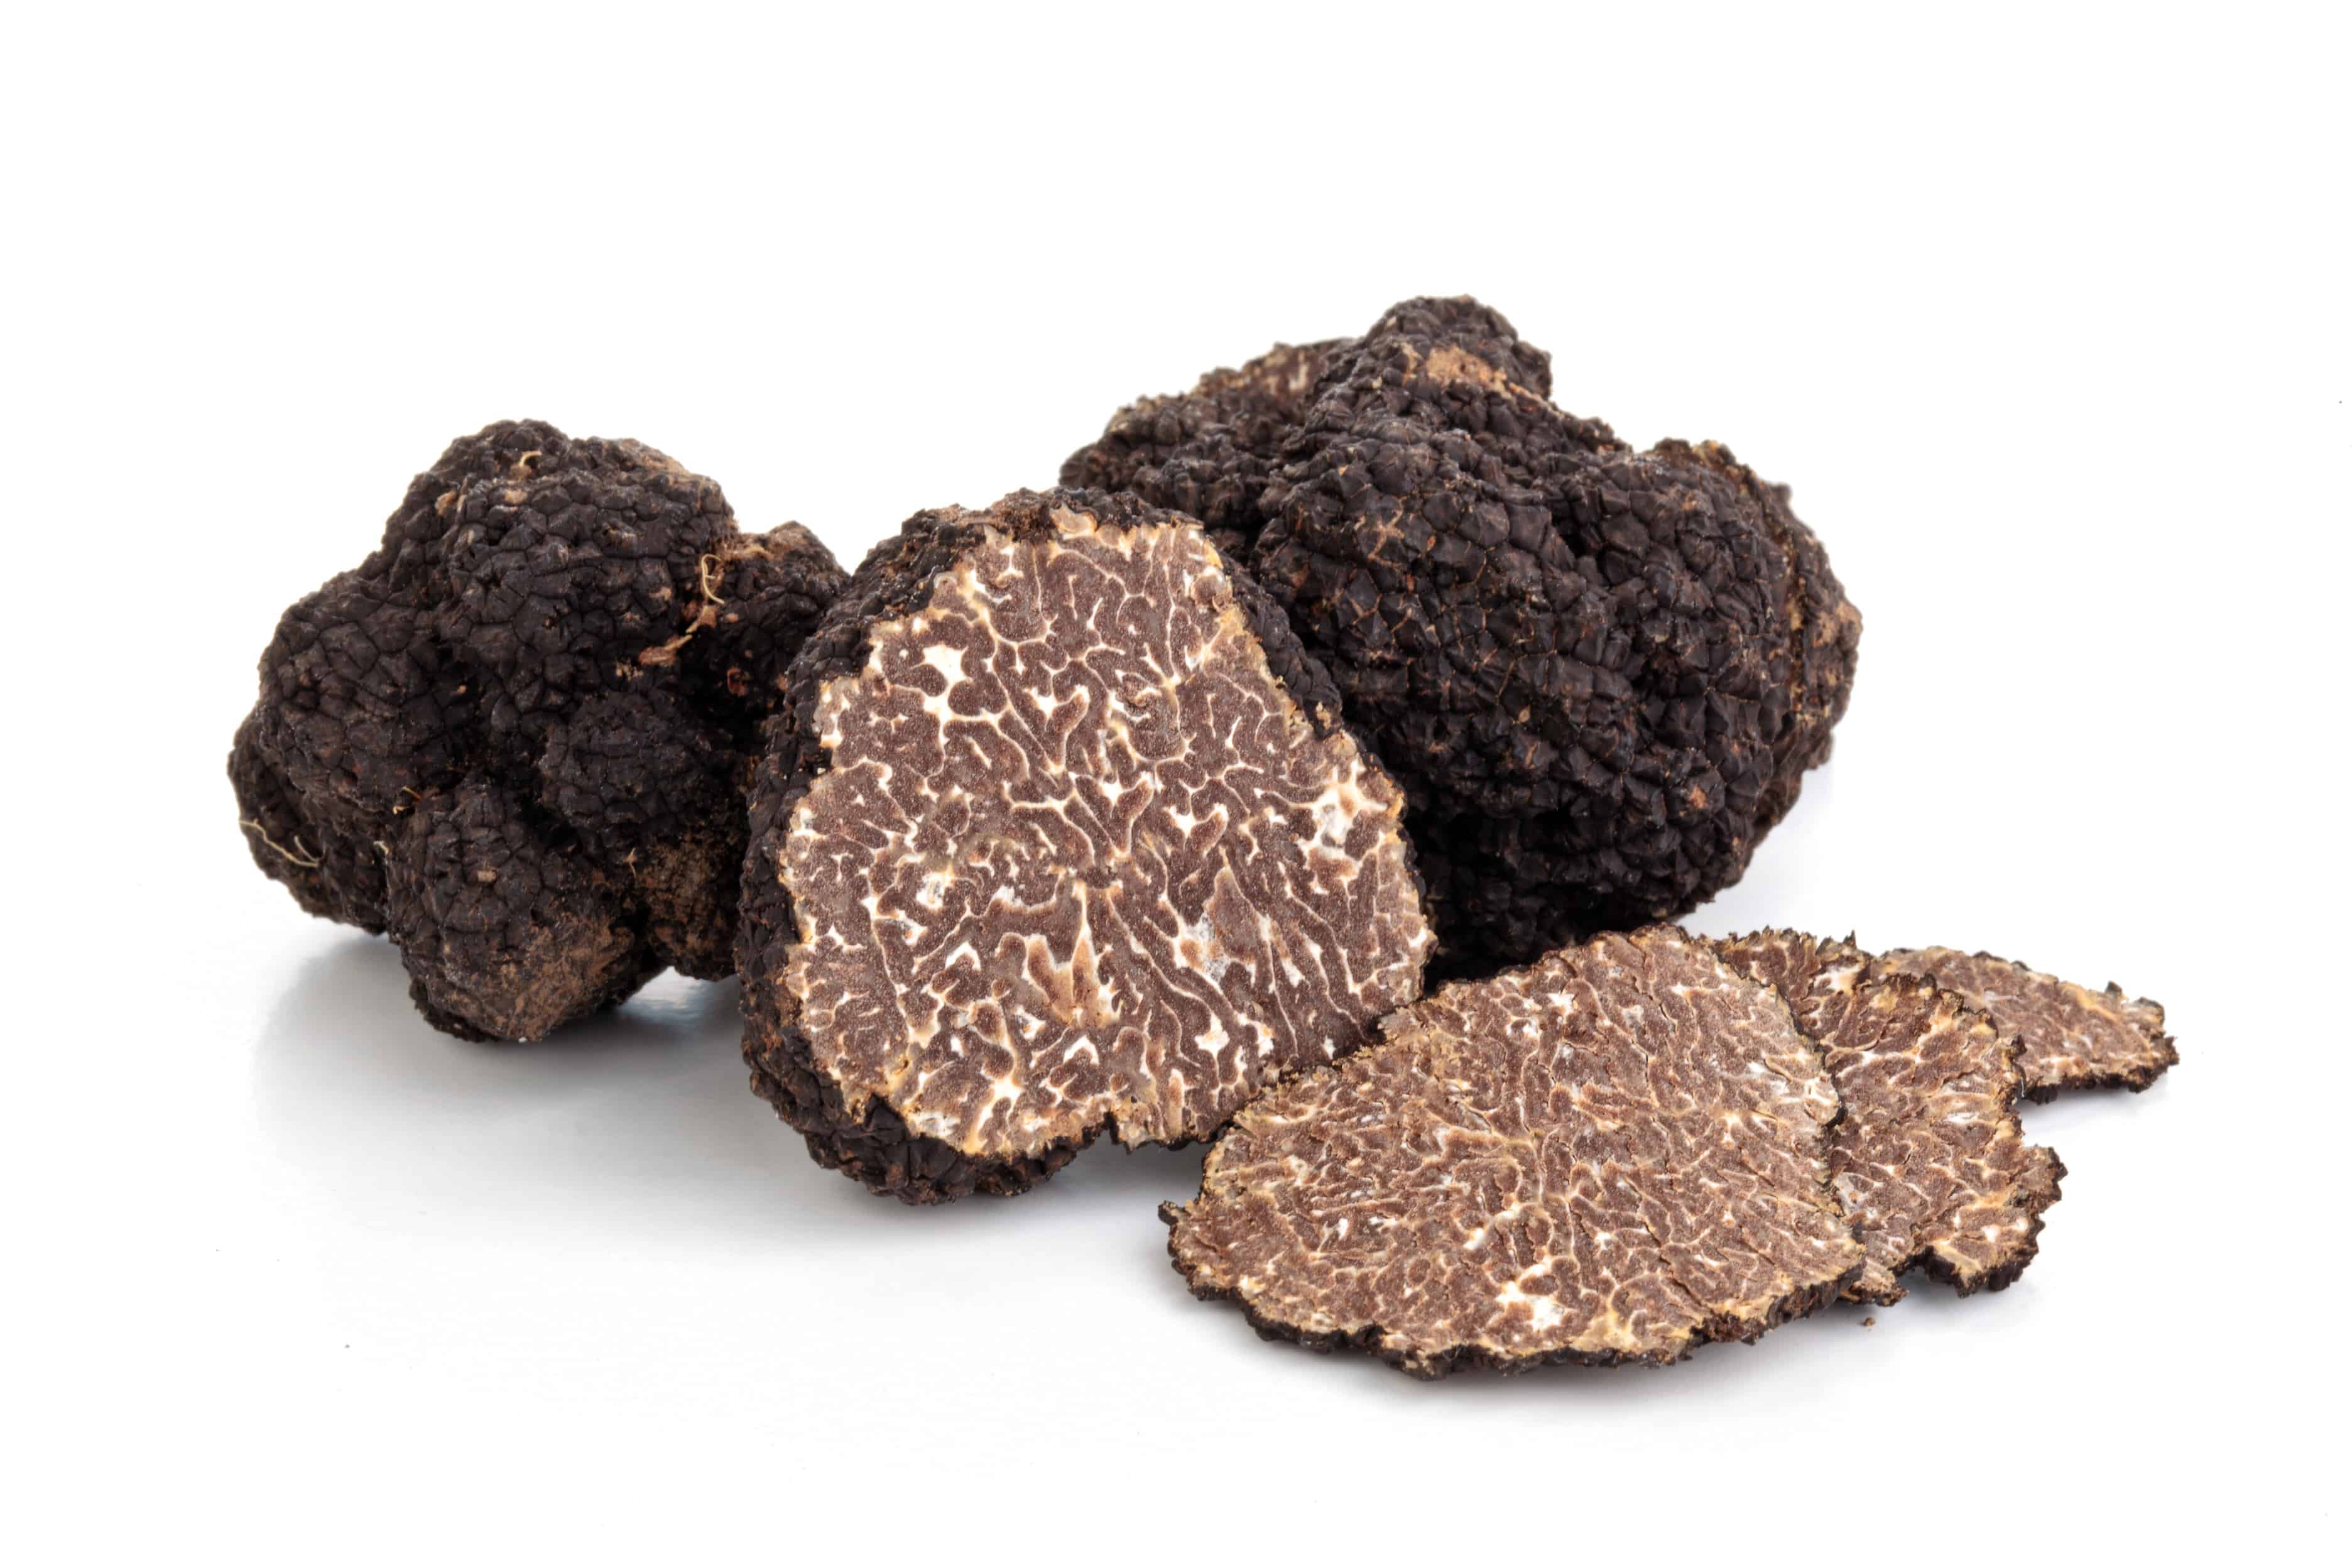 30 Truffle Facts About The World&amp;#39;s Most Expensive Fungus - Facts.net